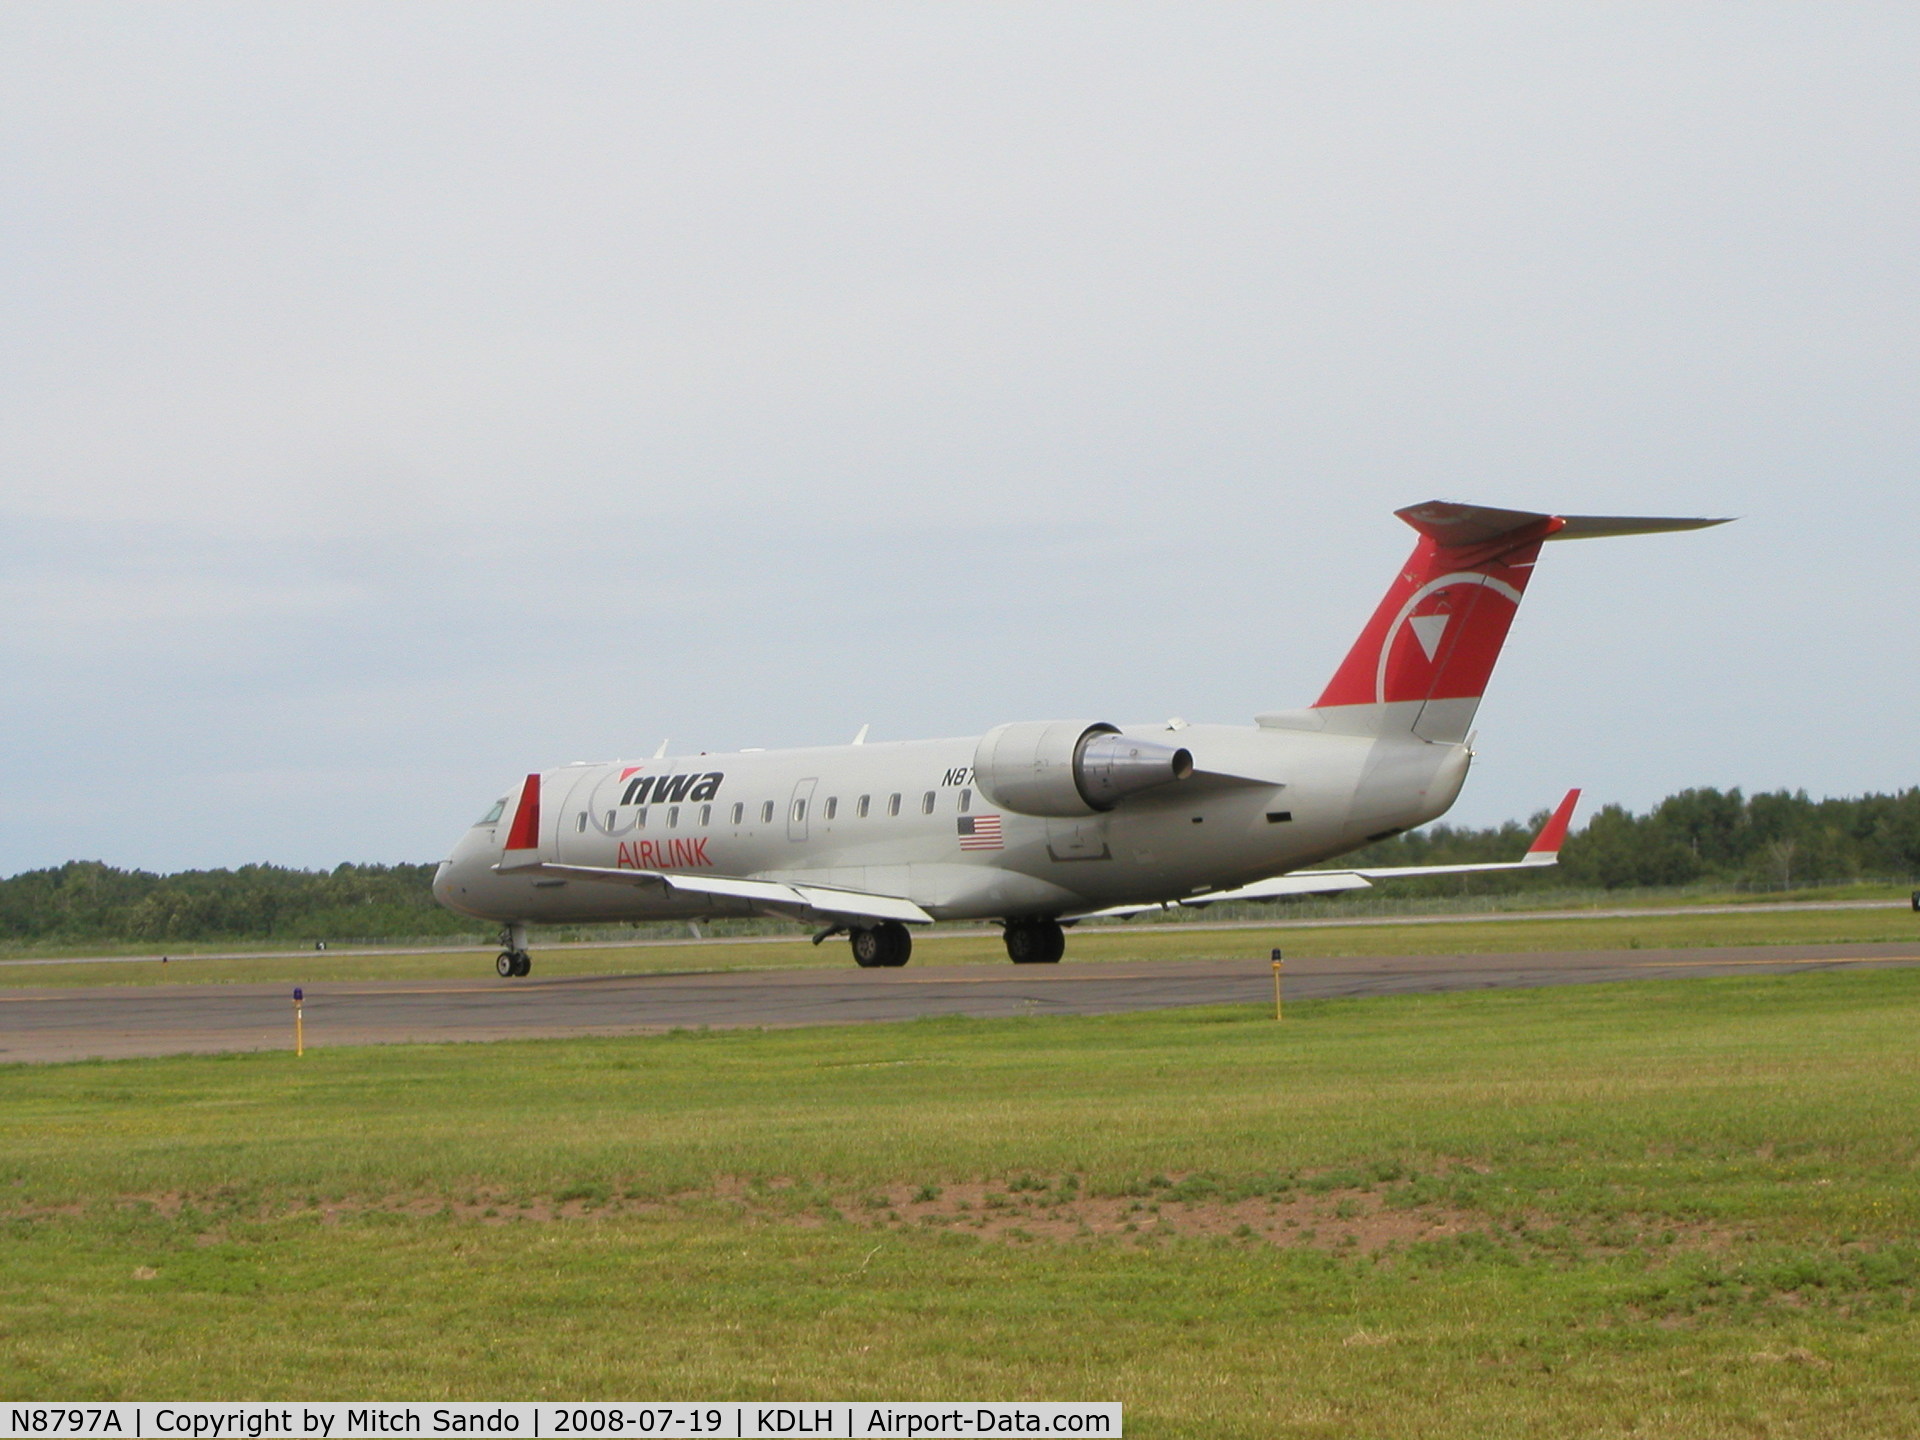 N8797A, 2003 Bombardier CRJ-200 (CL-600-2B19) C/N 7797, Duluth Air and Aviation Expo 2008.